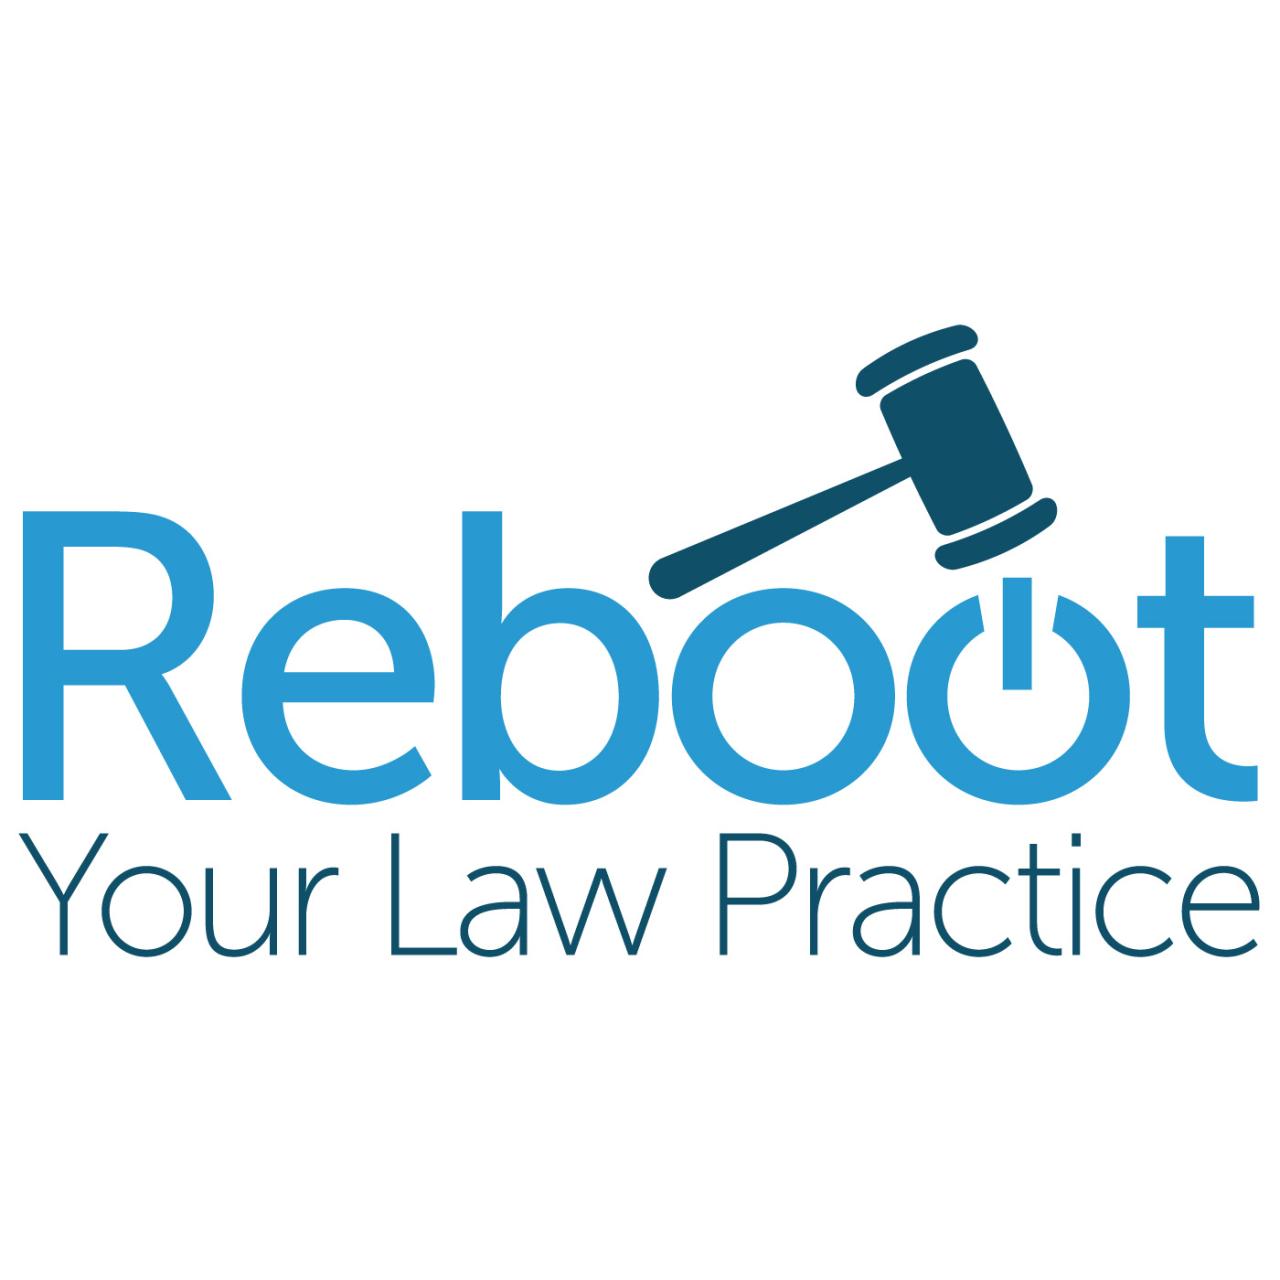 Reboot your law practice podcast 5 preparing to network